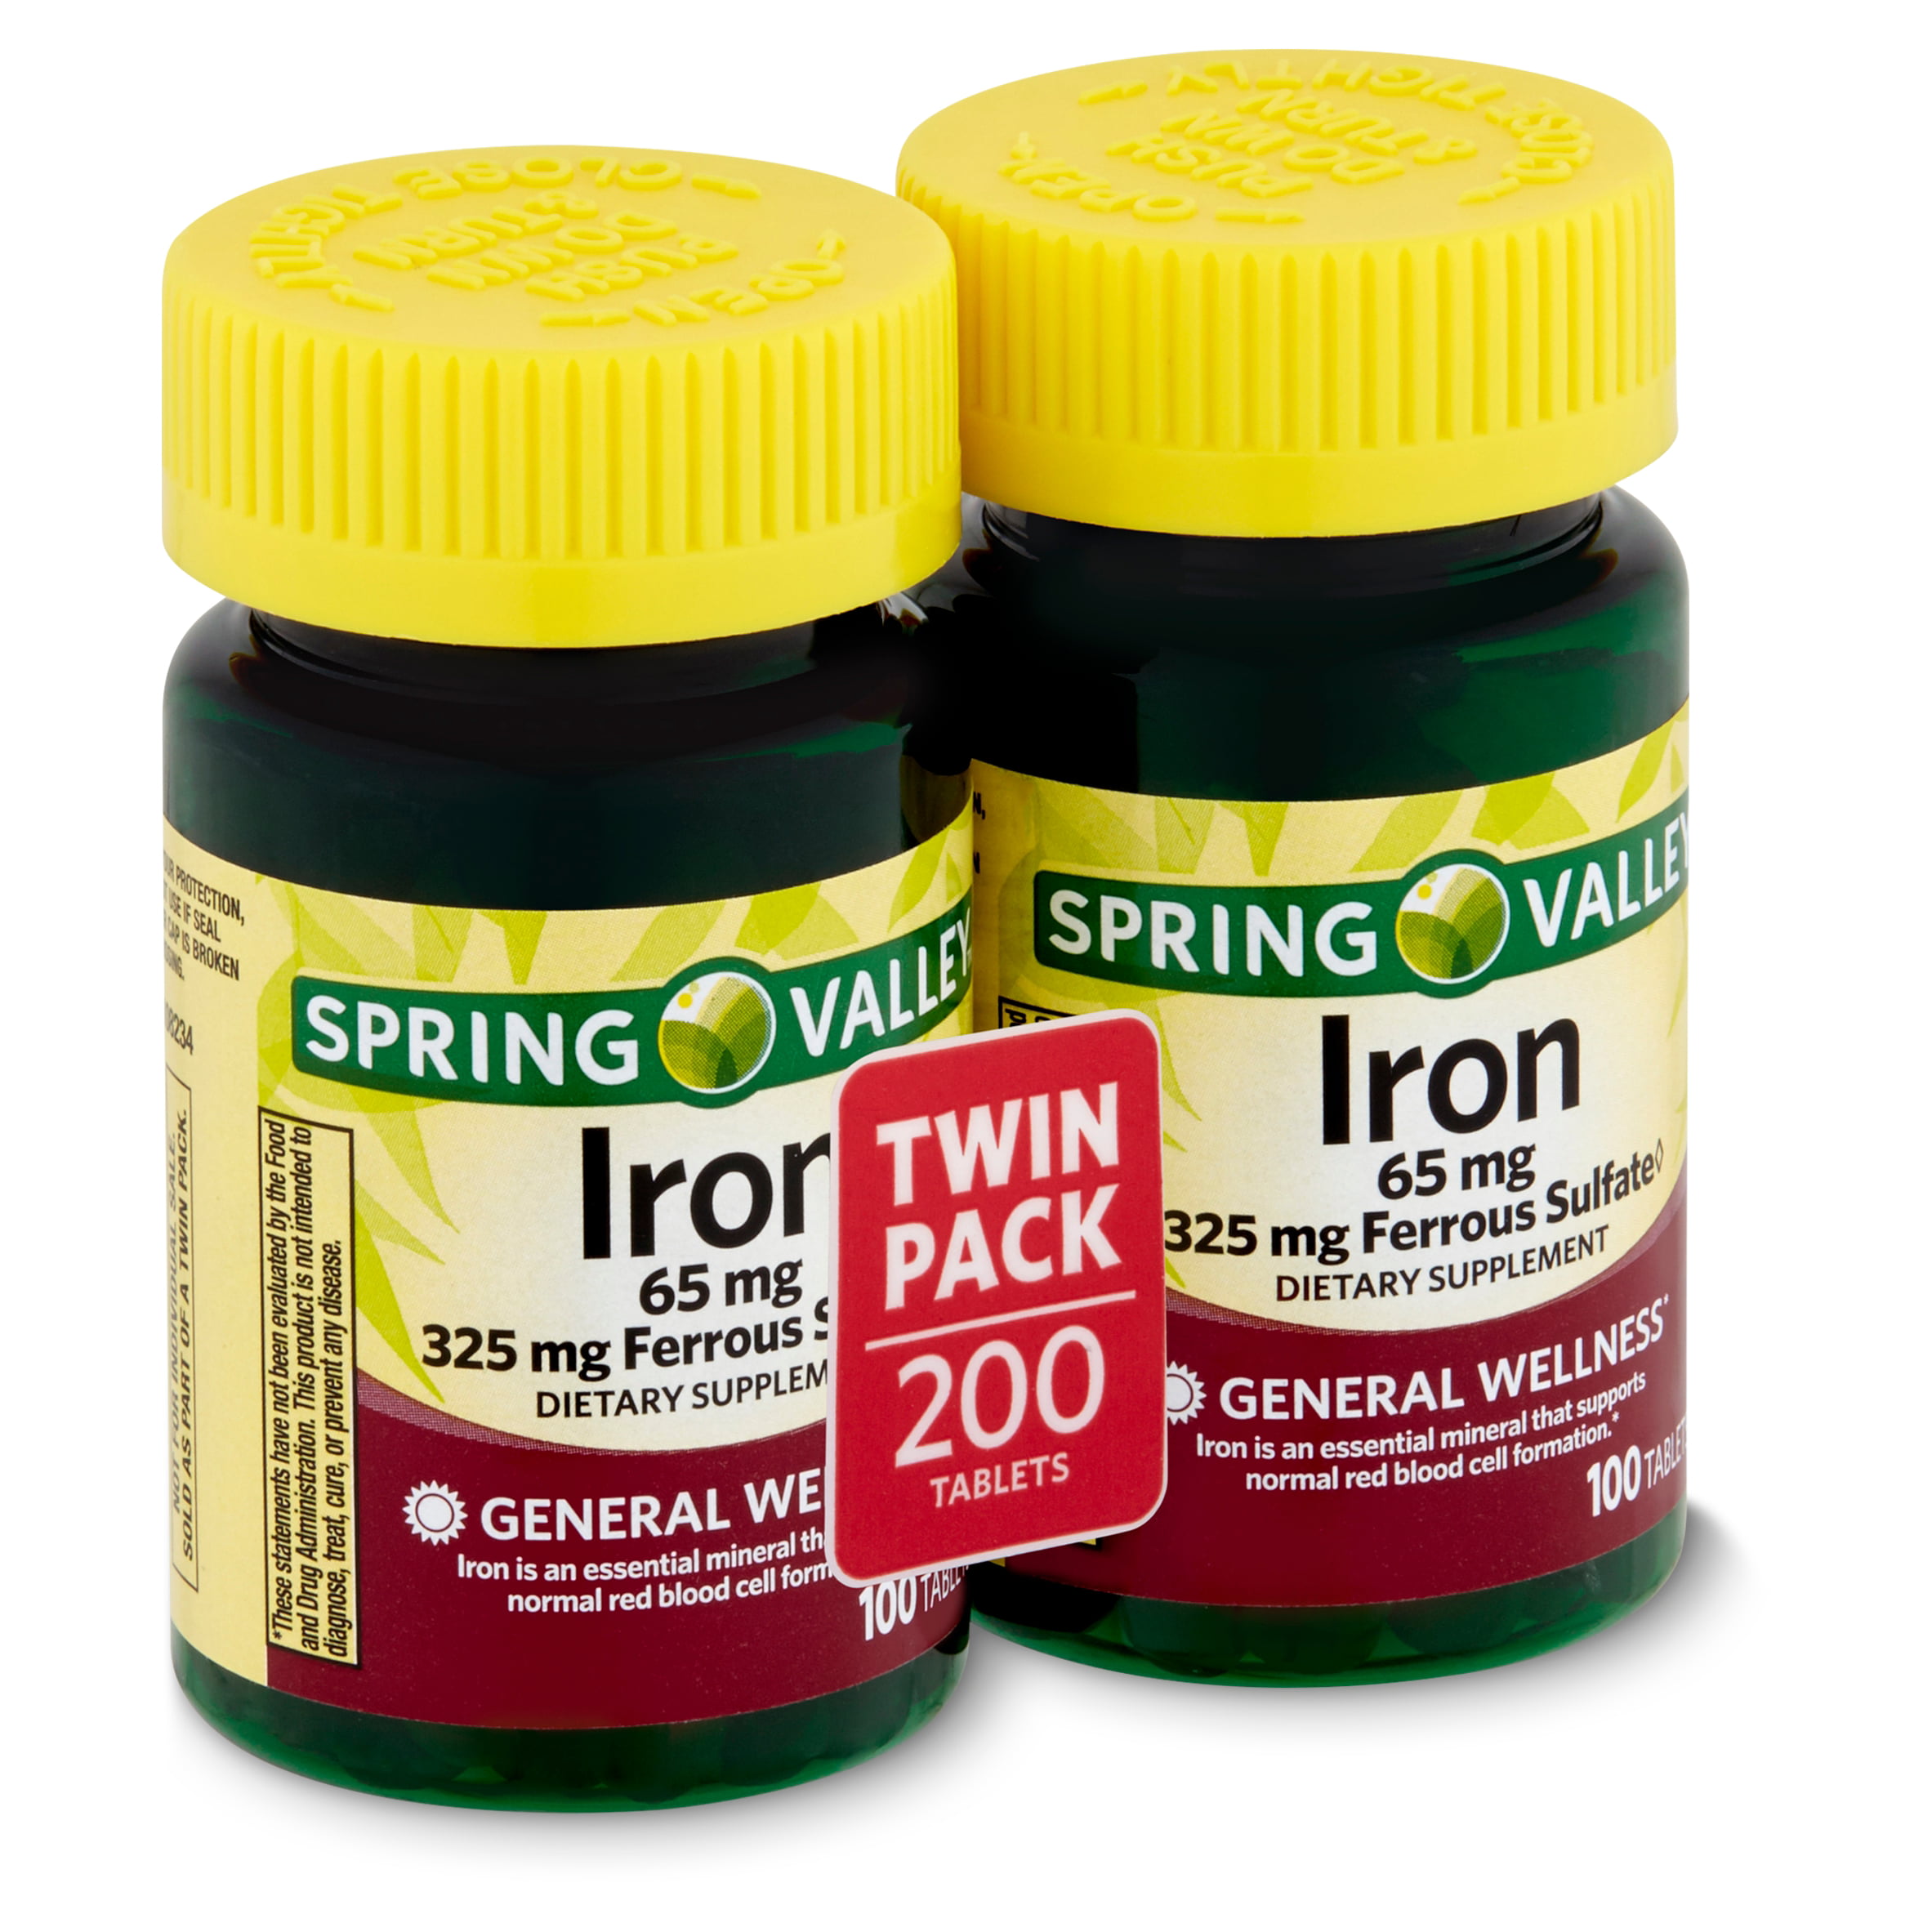 Iron Tablets - Spring Valley Twin Pack 100cnt